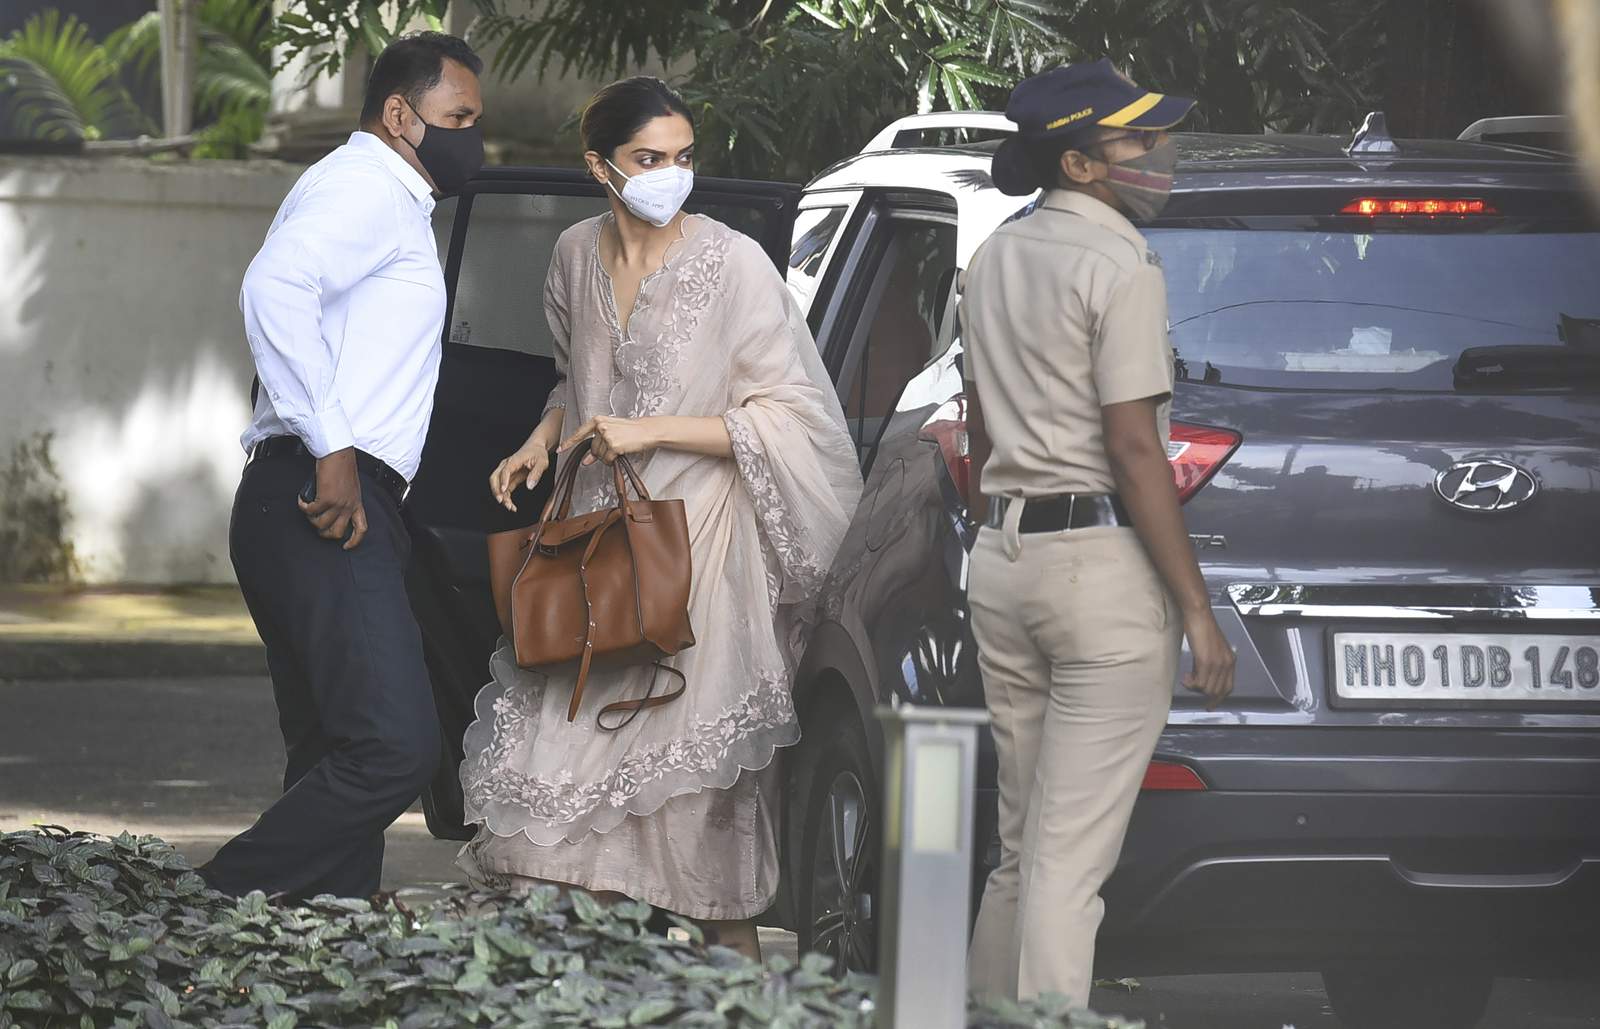 3 Bollywood stars questioned in drug investigation